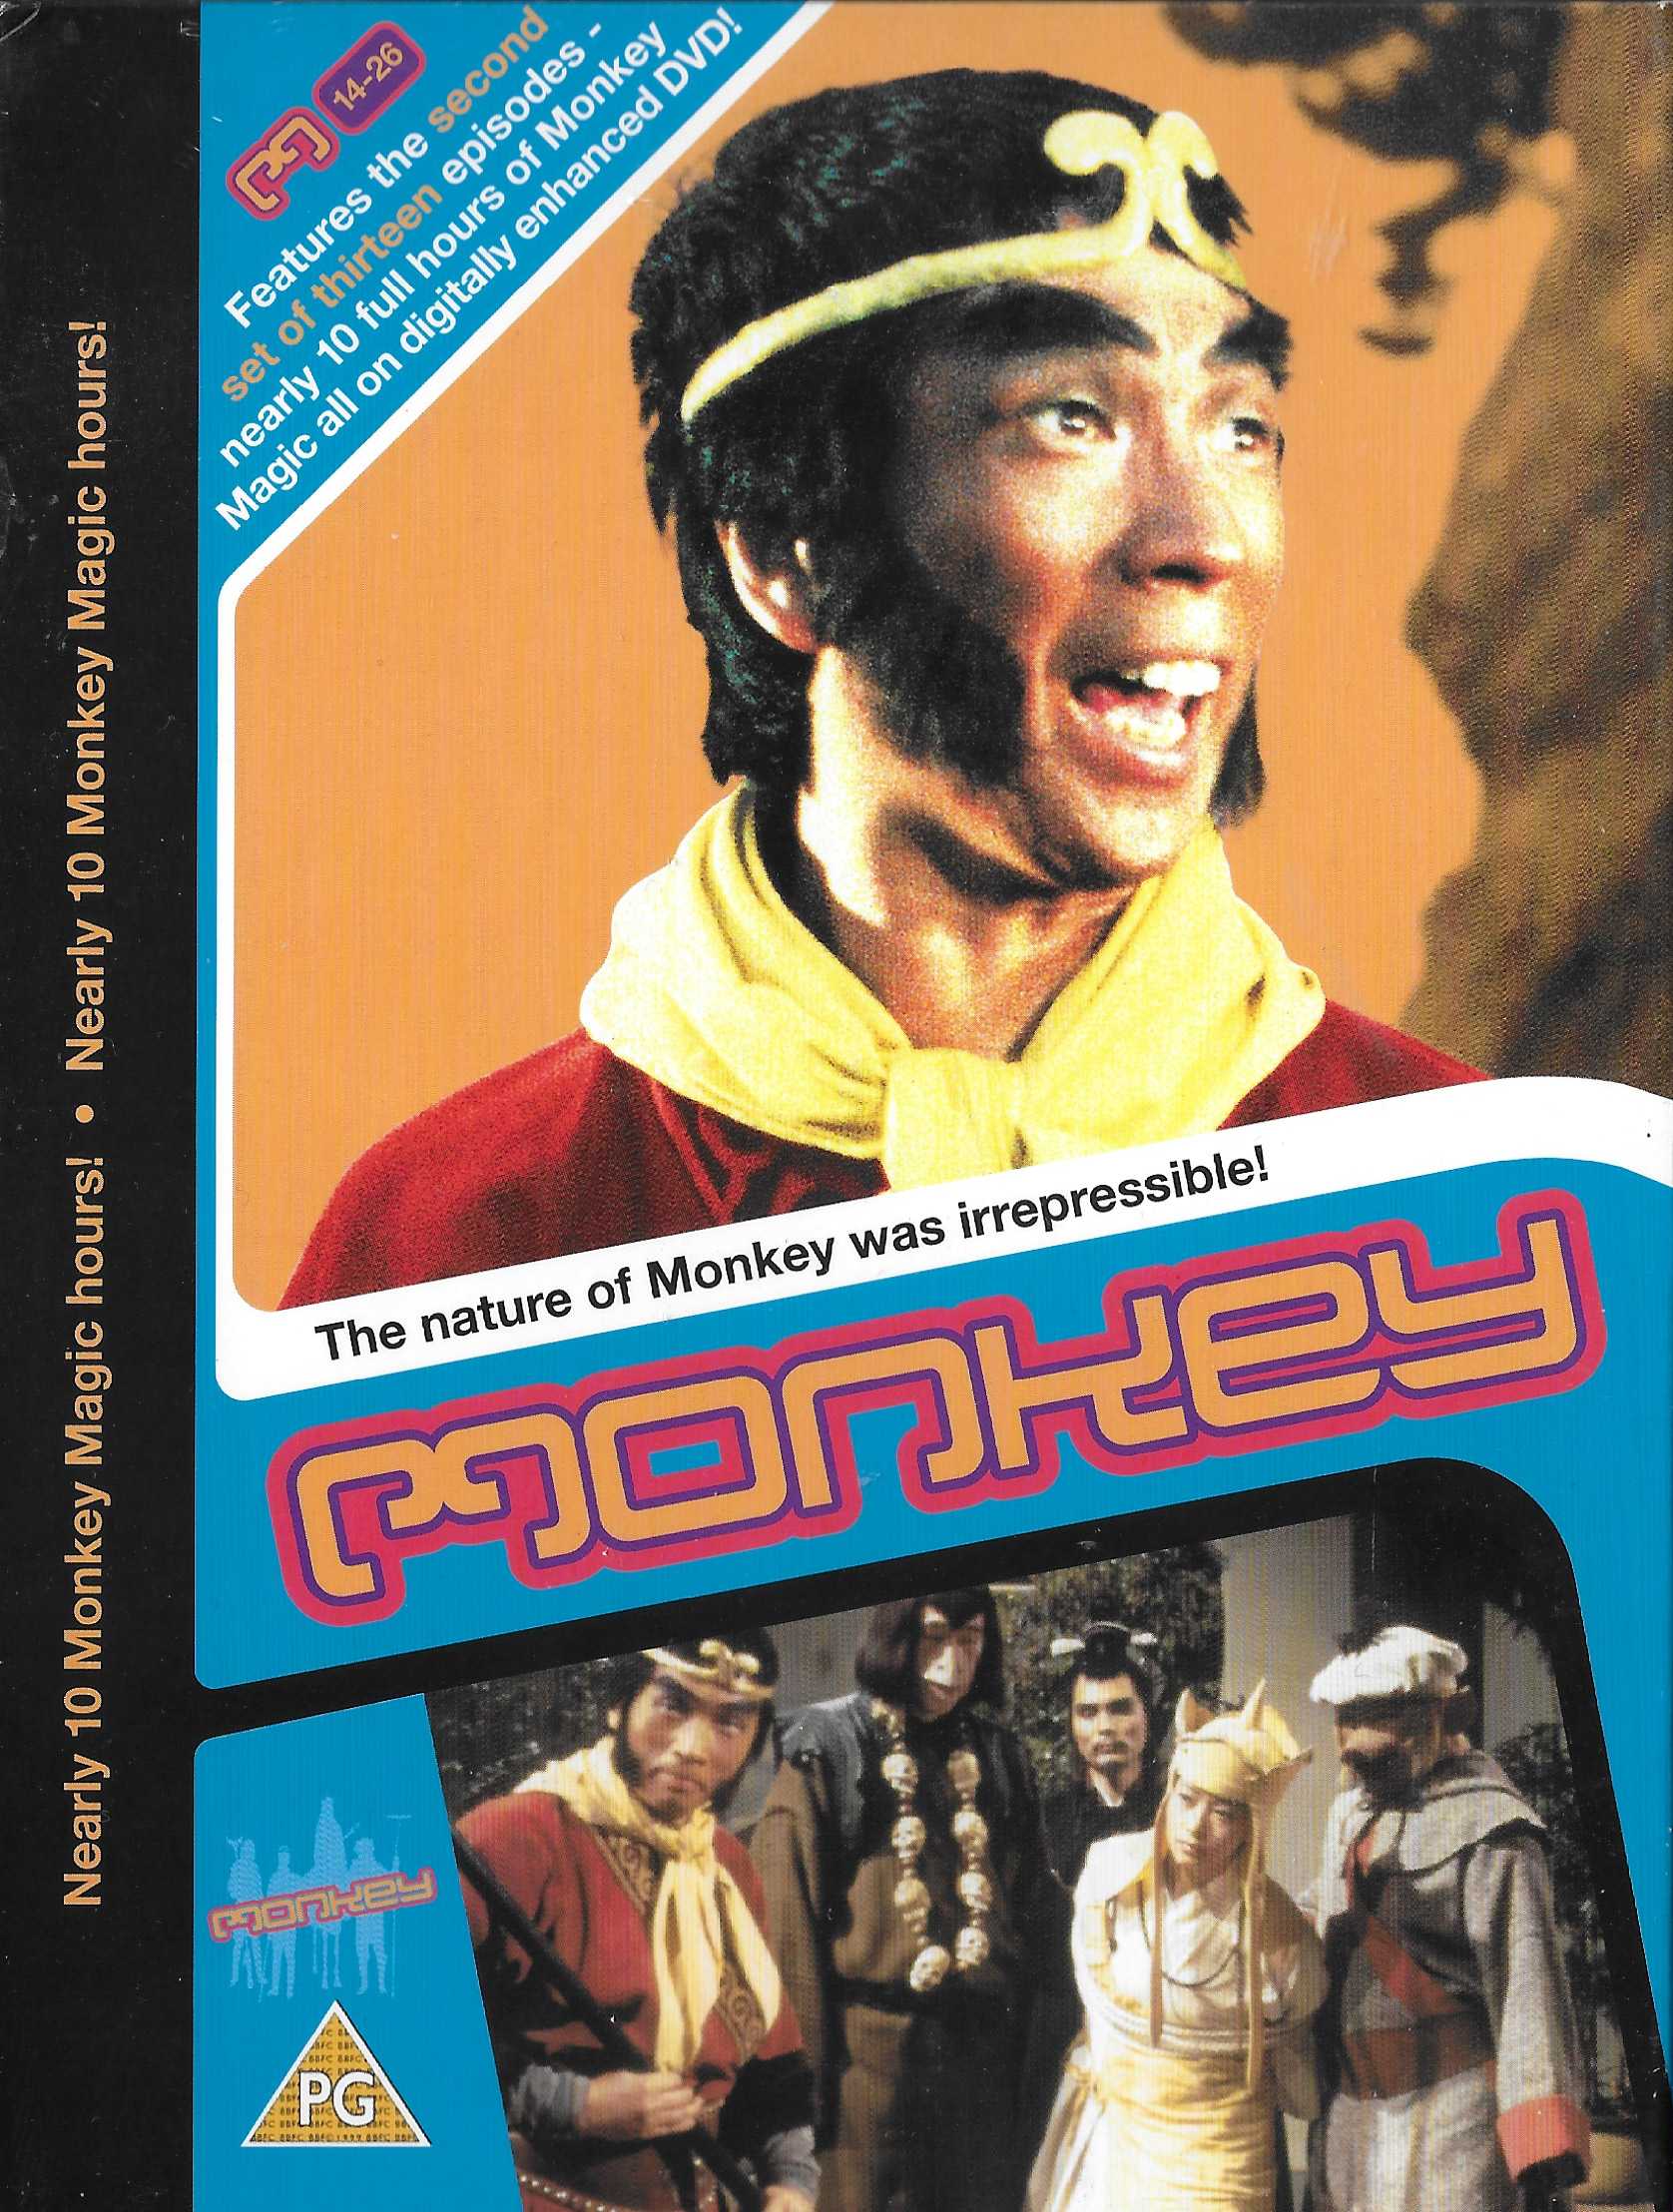 Picture of Monkey - Series 1B by artist David Weir from the BBC dvds - Records and Tapes library